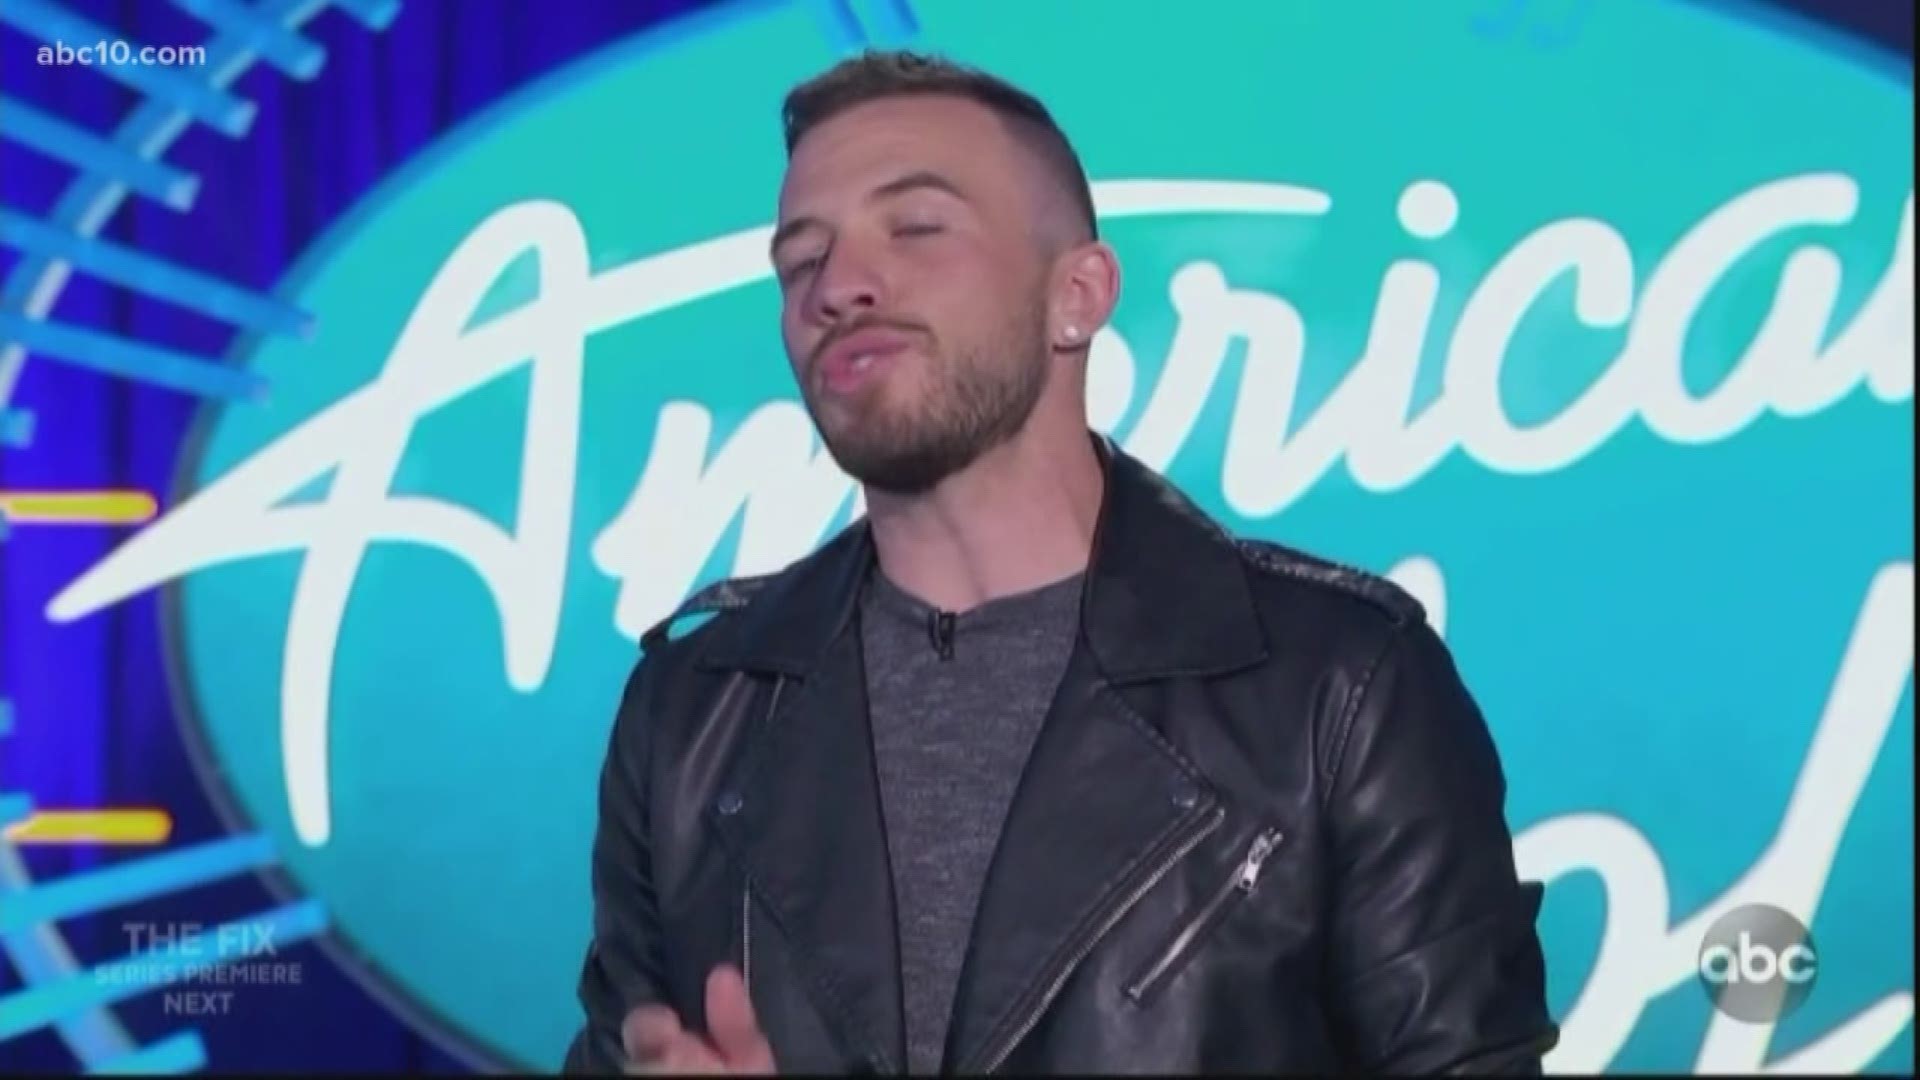 The City of Modesto is cheering on hometown singer Ryan Hammond, who wowed the American Idol judges, Monday night, and advance ed to the Hollywood portion of the contest.